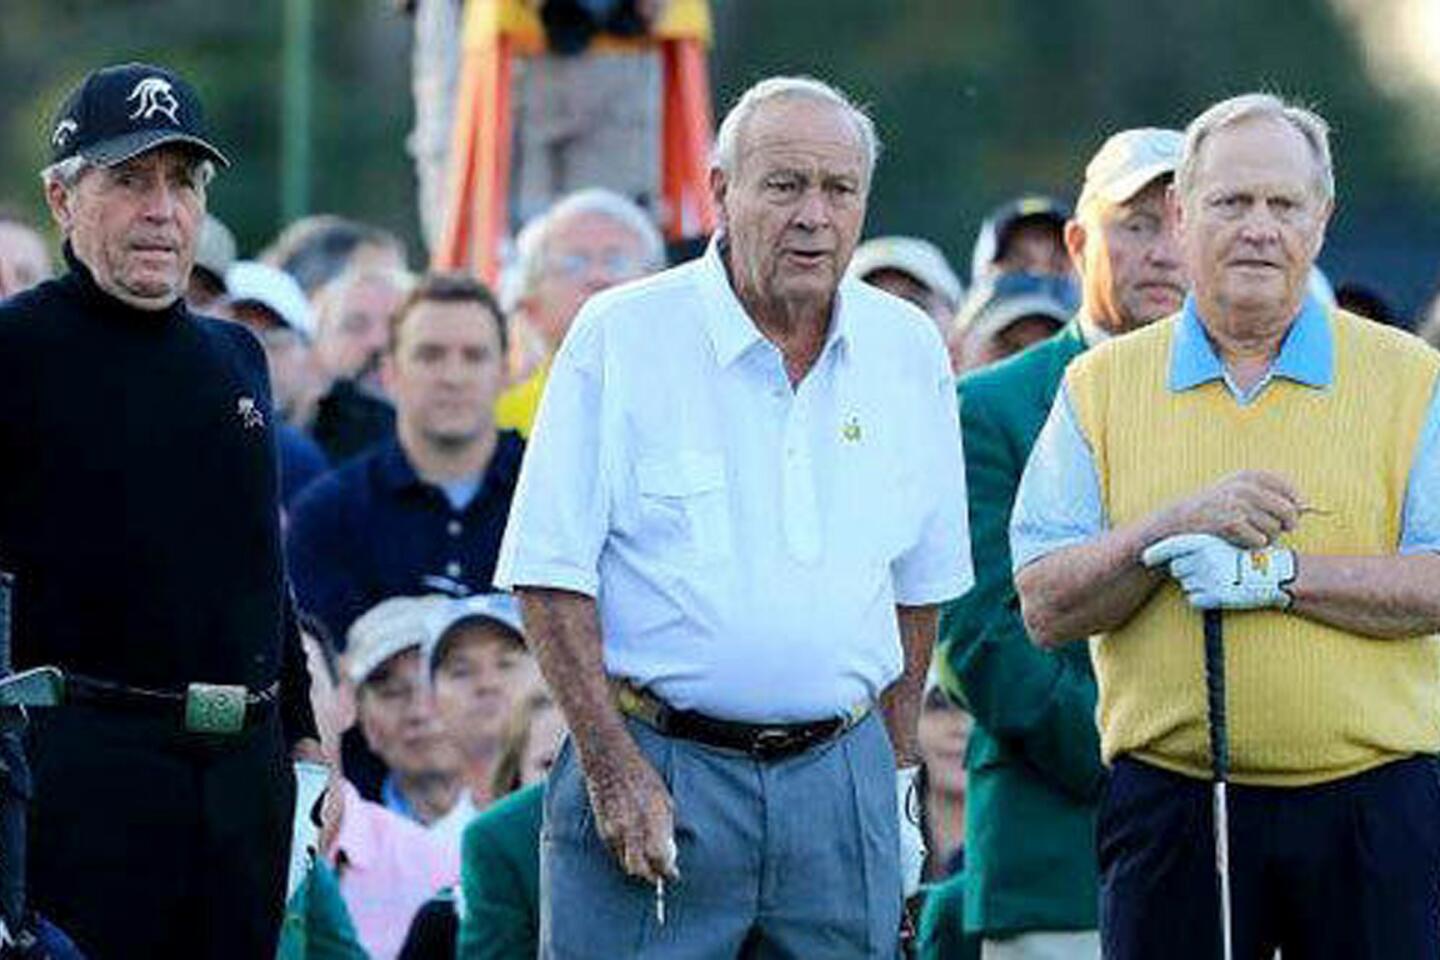 Arnold Palmer, center, is joined by Gary Player, left, and Jack Nicklaus on the first tee at Augusta National for the 2012 Master.